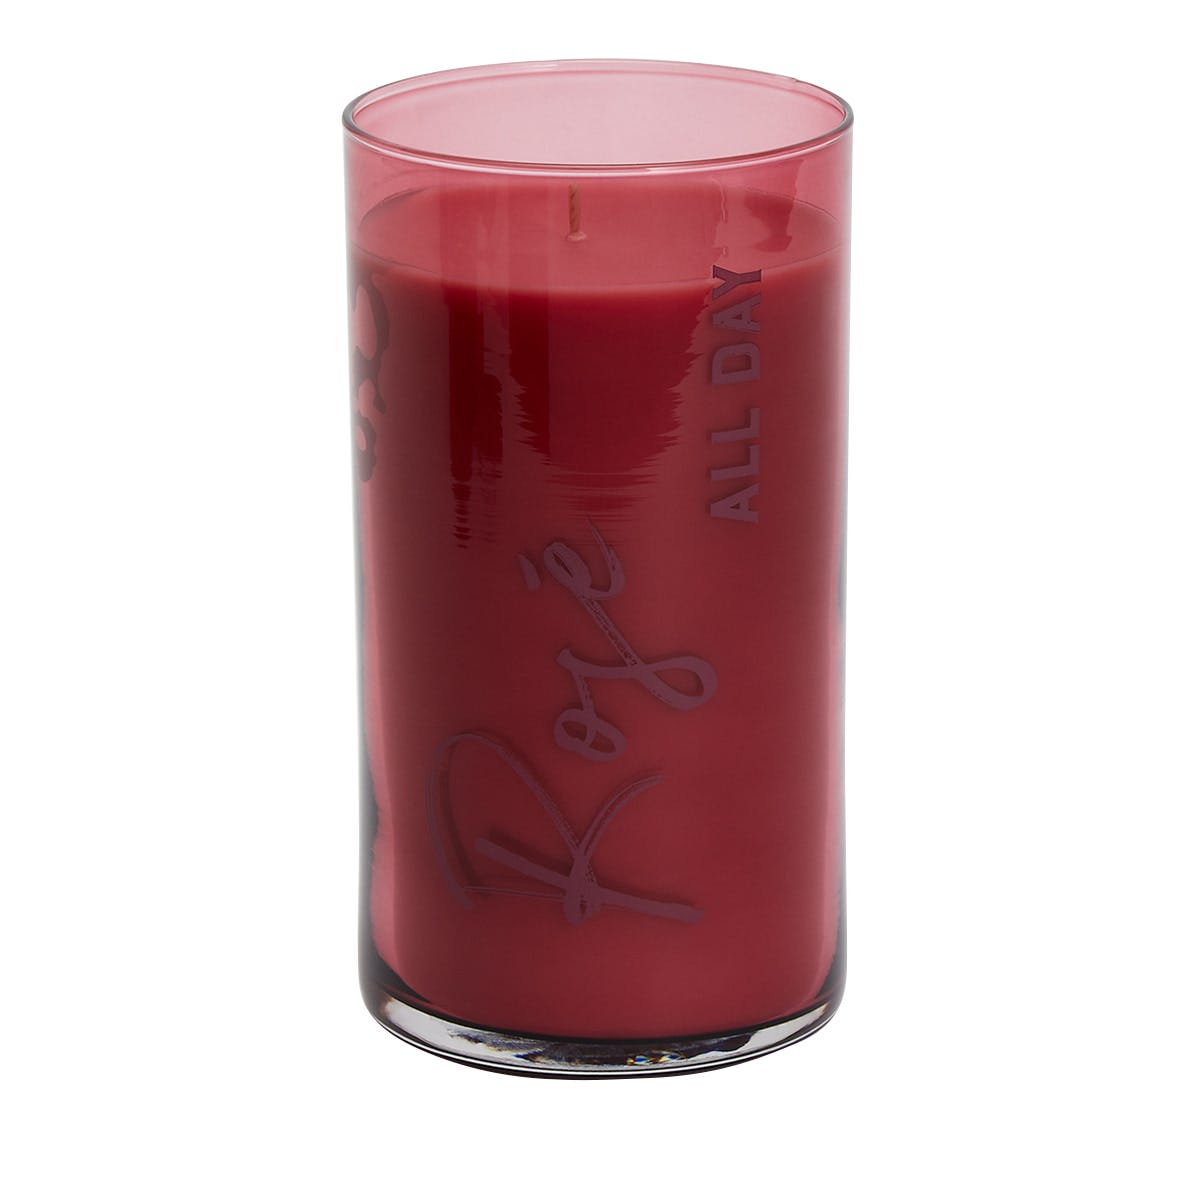 Rosé All Day - Sweet Strawberries and Pink Rose Scented Jar Candle